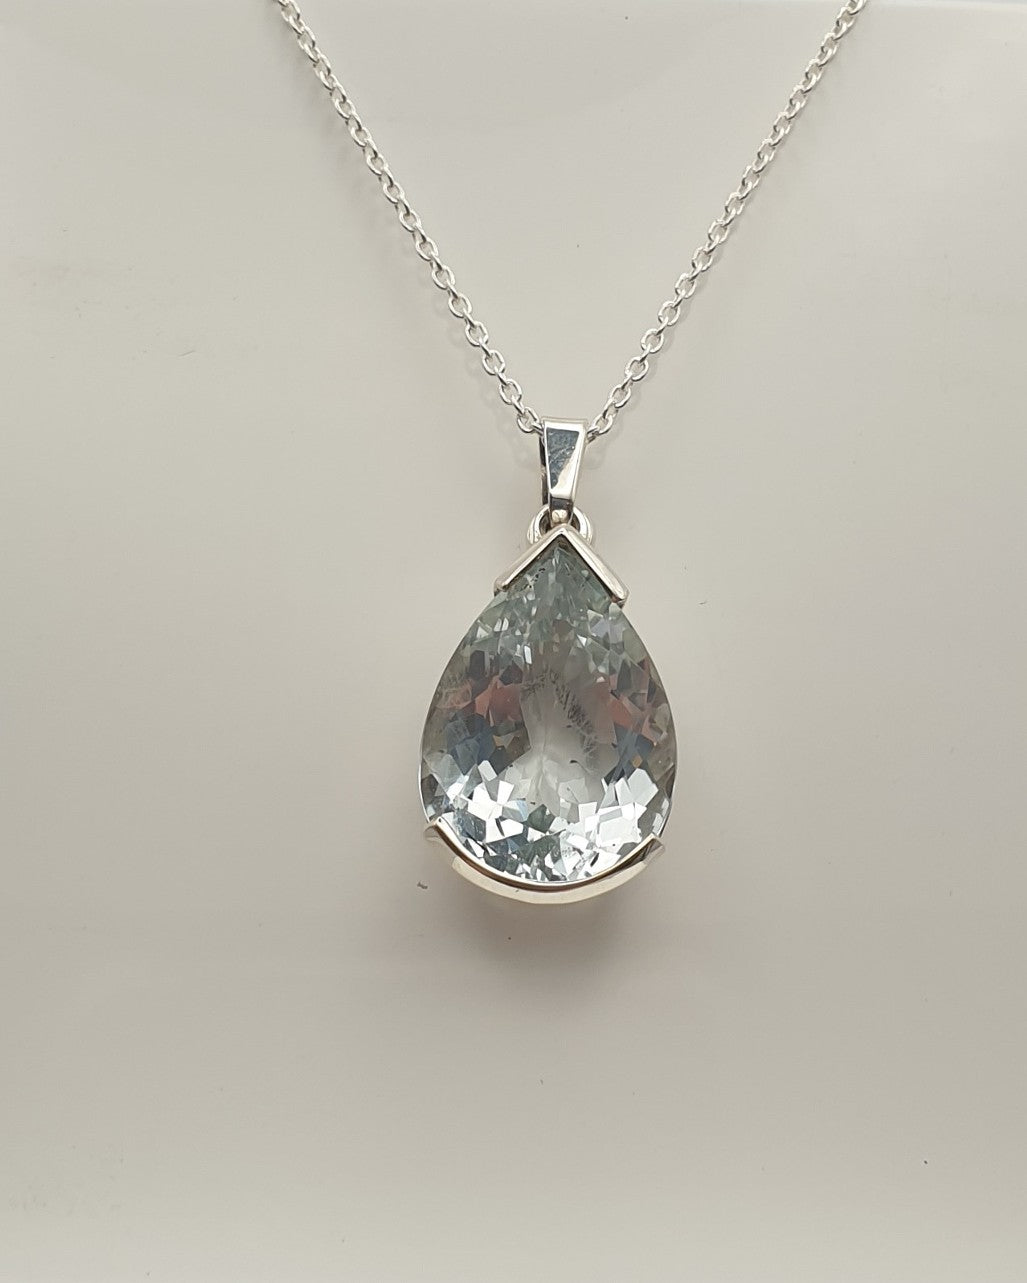 12.91 carat pear shaped white topaz necklace